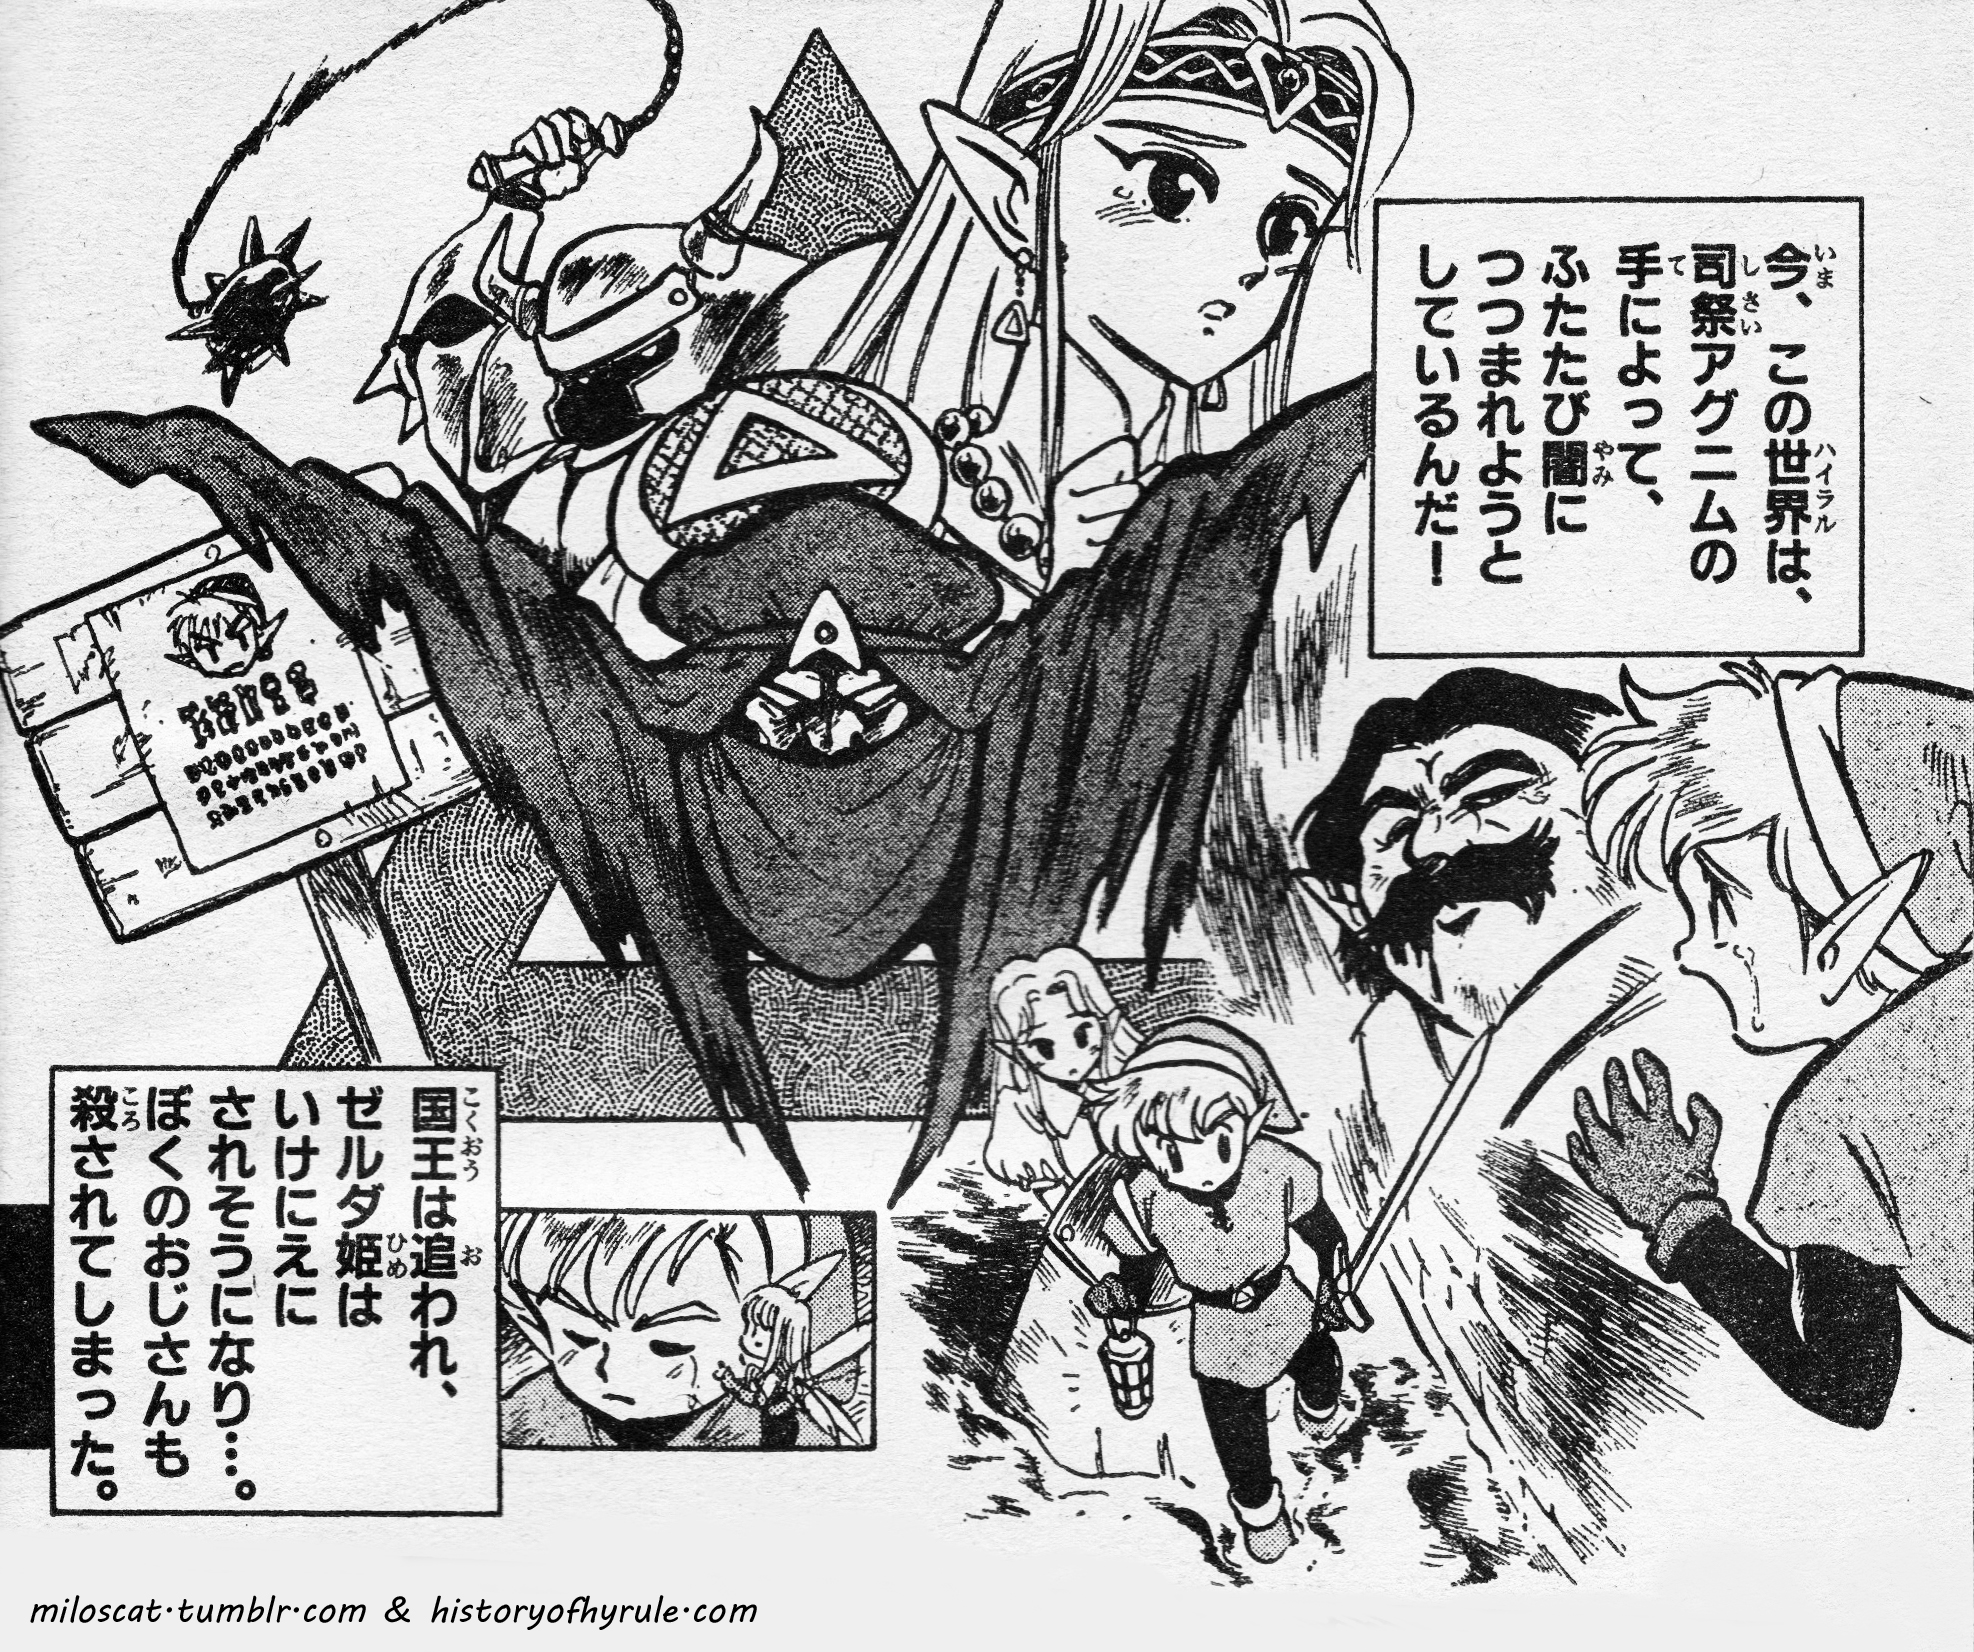 A Link To The Past Comic History of Hyrule (Zelda Archivist) ♿🇵🇸✊🏿🏳️‍⚧️ on X: "I took a detour  from working on HoH's official art gallery to clean this super cute Link to  the Past manga that @MiloScat informed